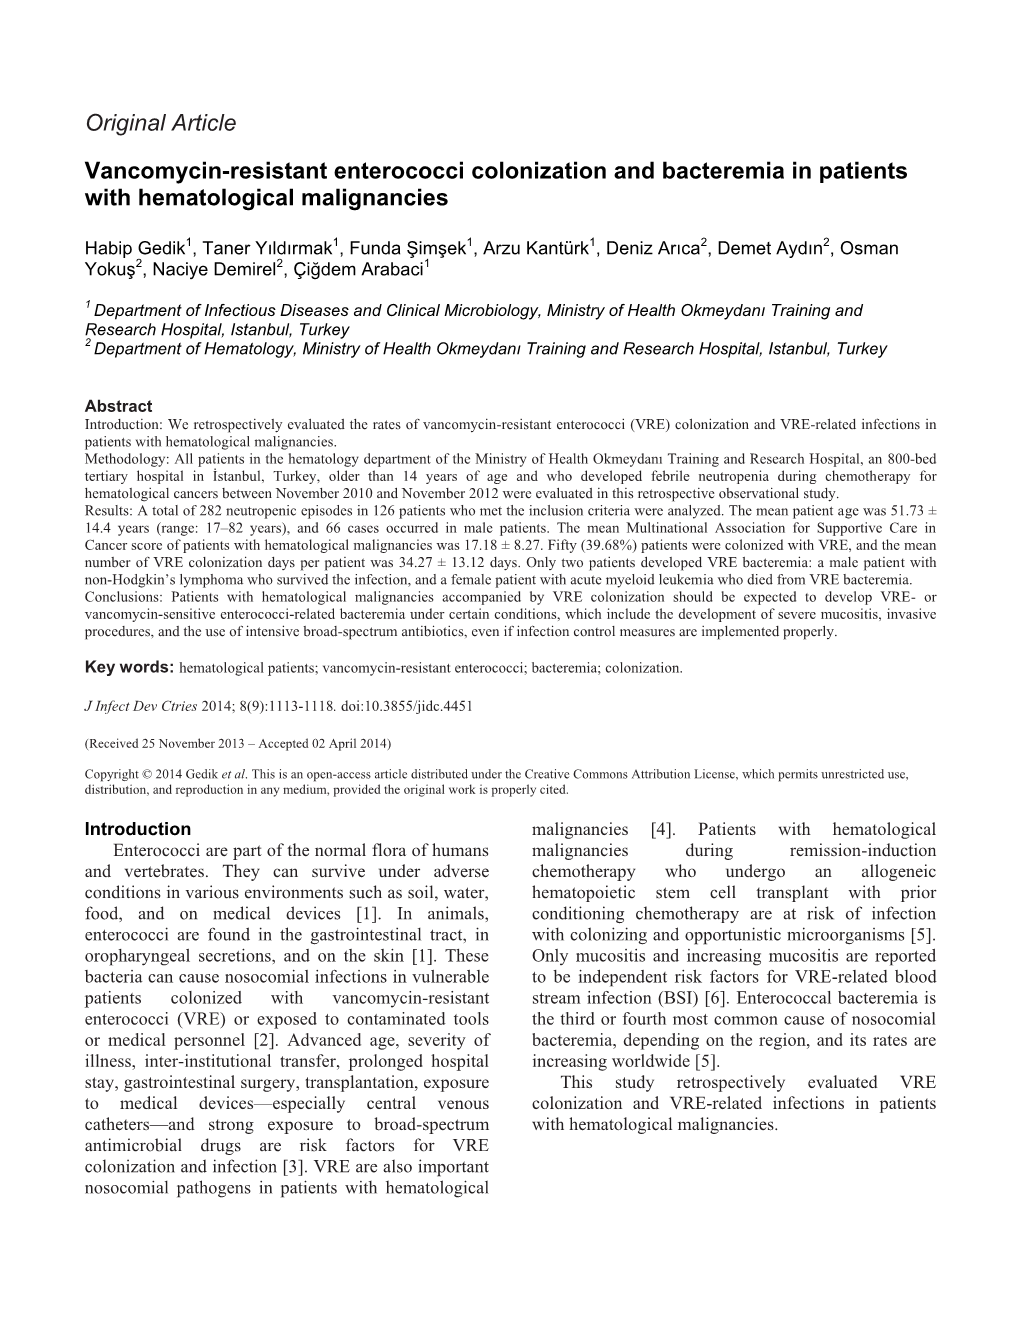 Vancomycin-Resistant Enterococci Colonization and Bacteremia in Patients with Hematological Malignancies